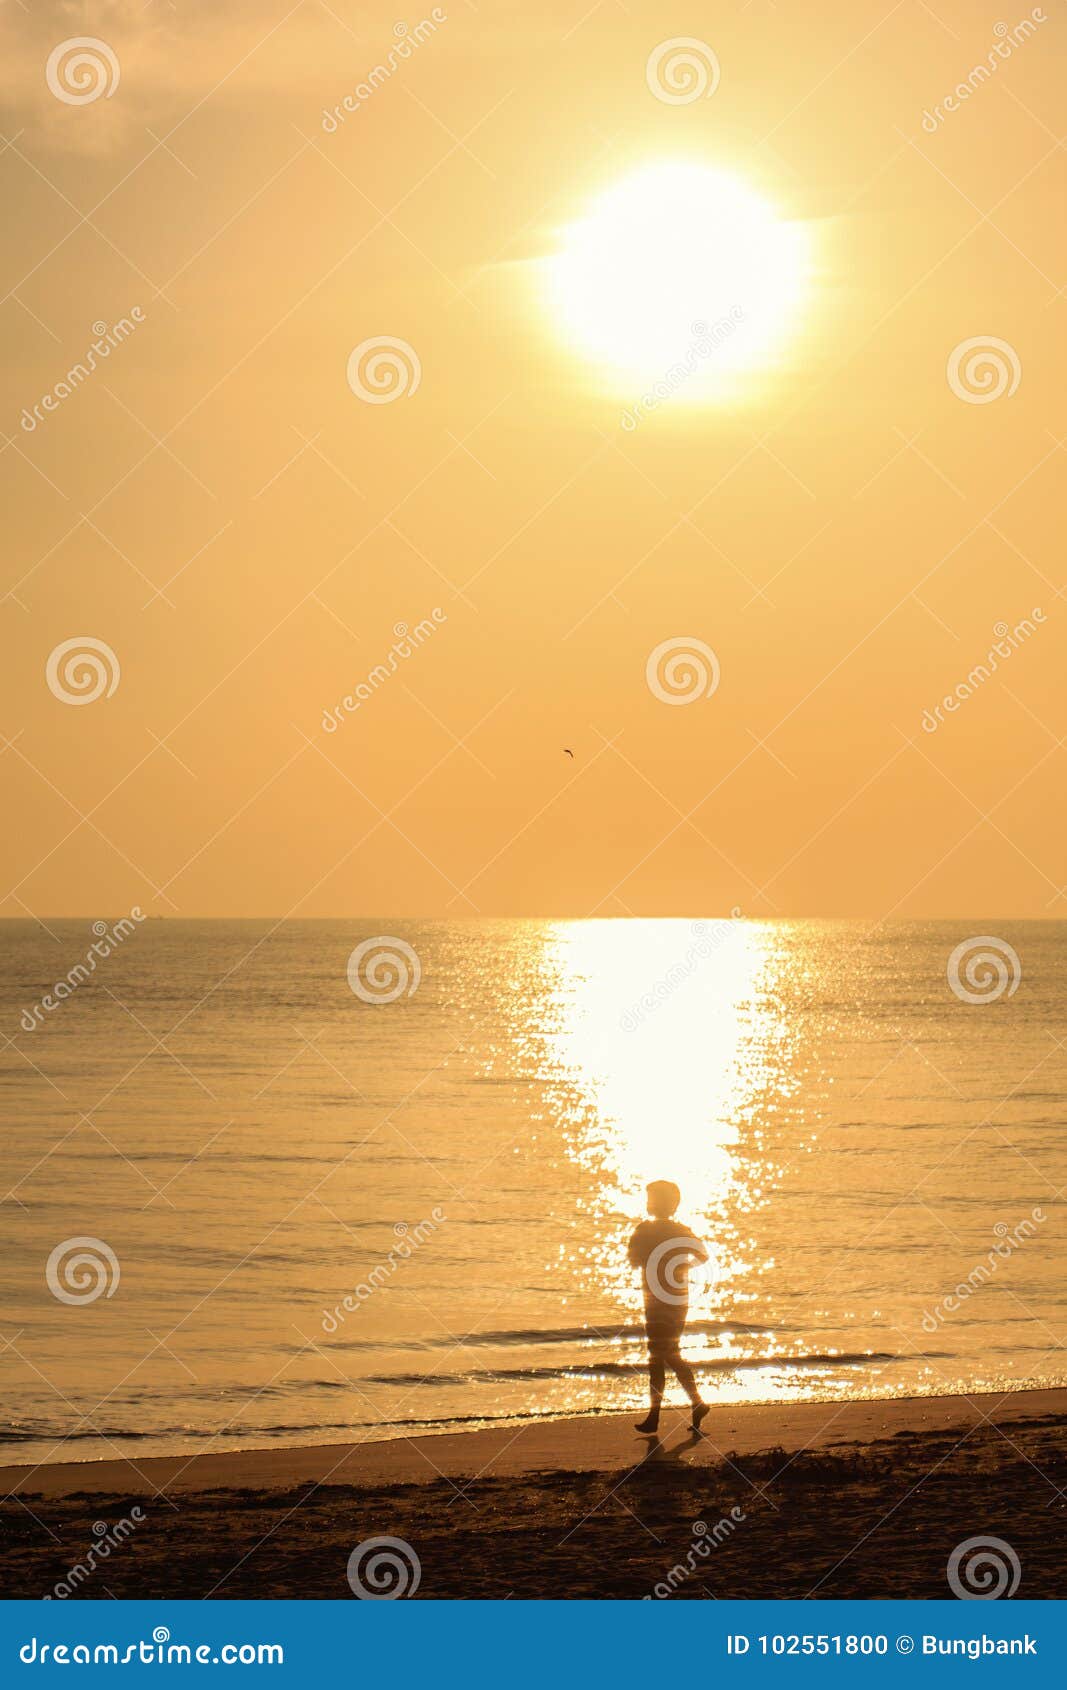 Single guy jogging with bare feet on beach in sunshine day